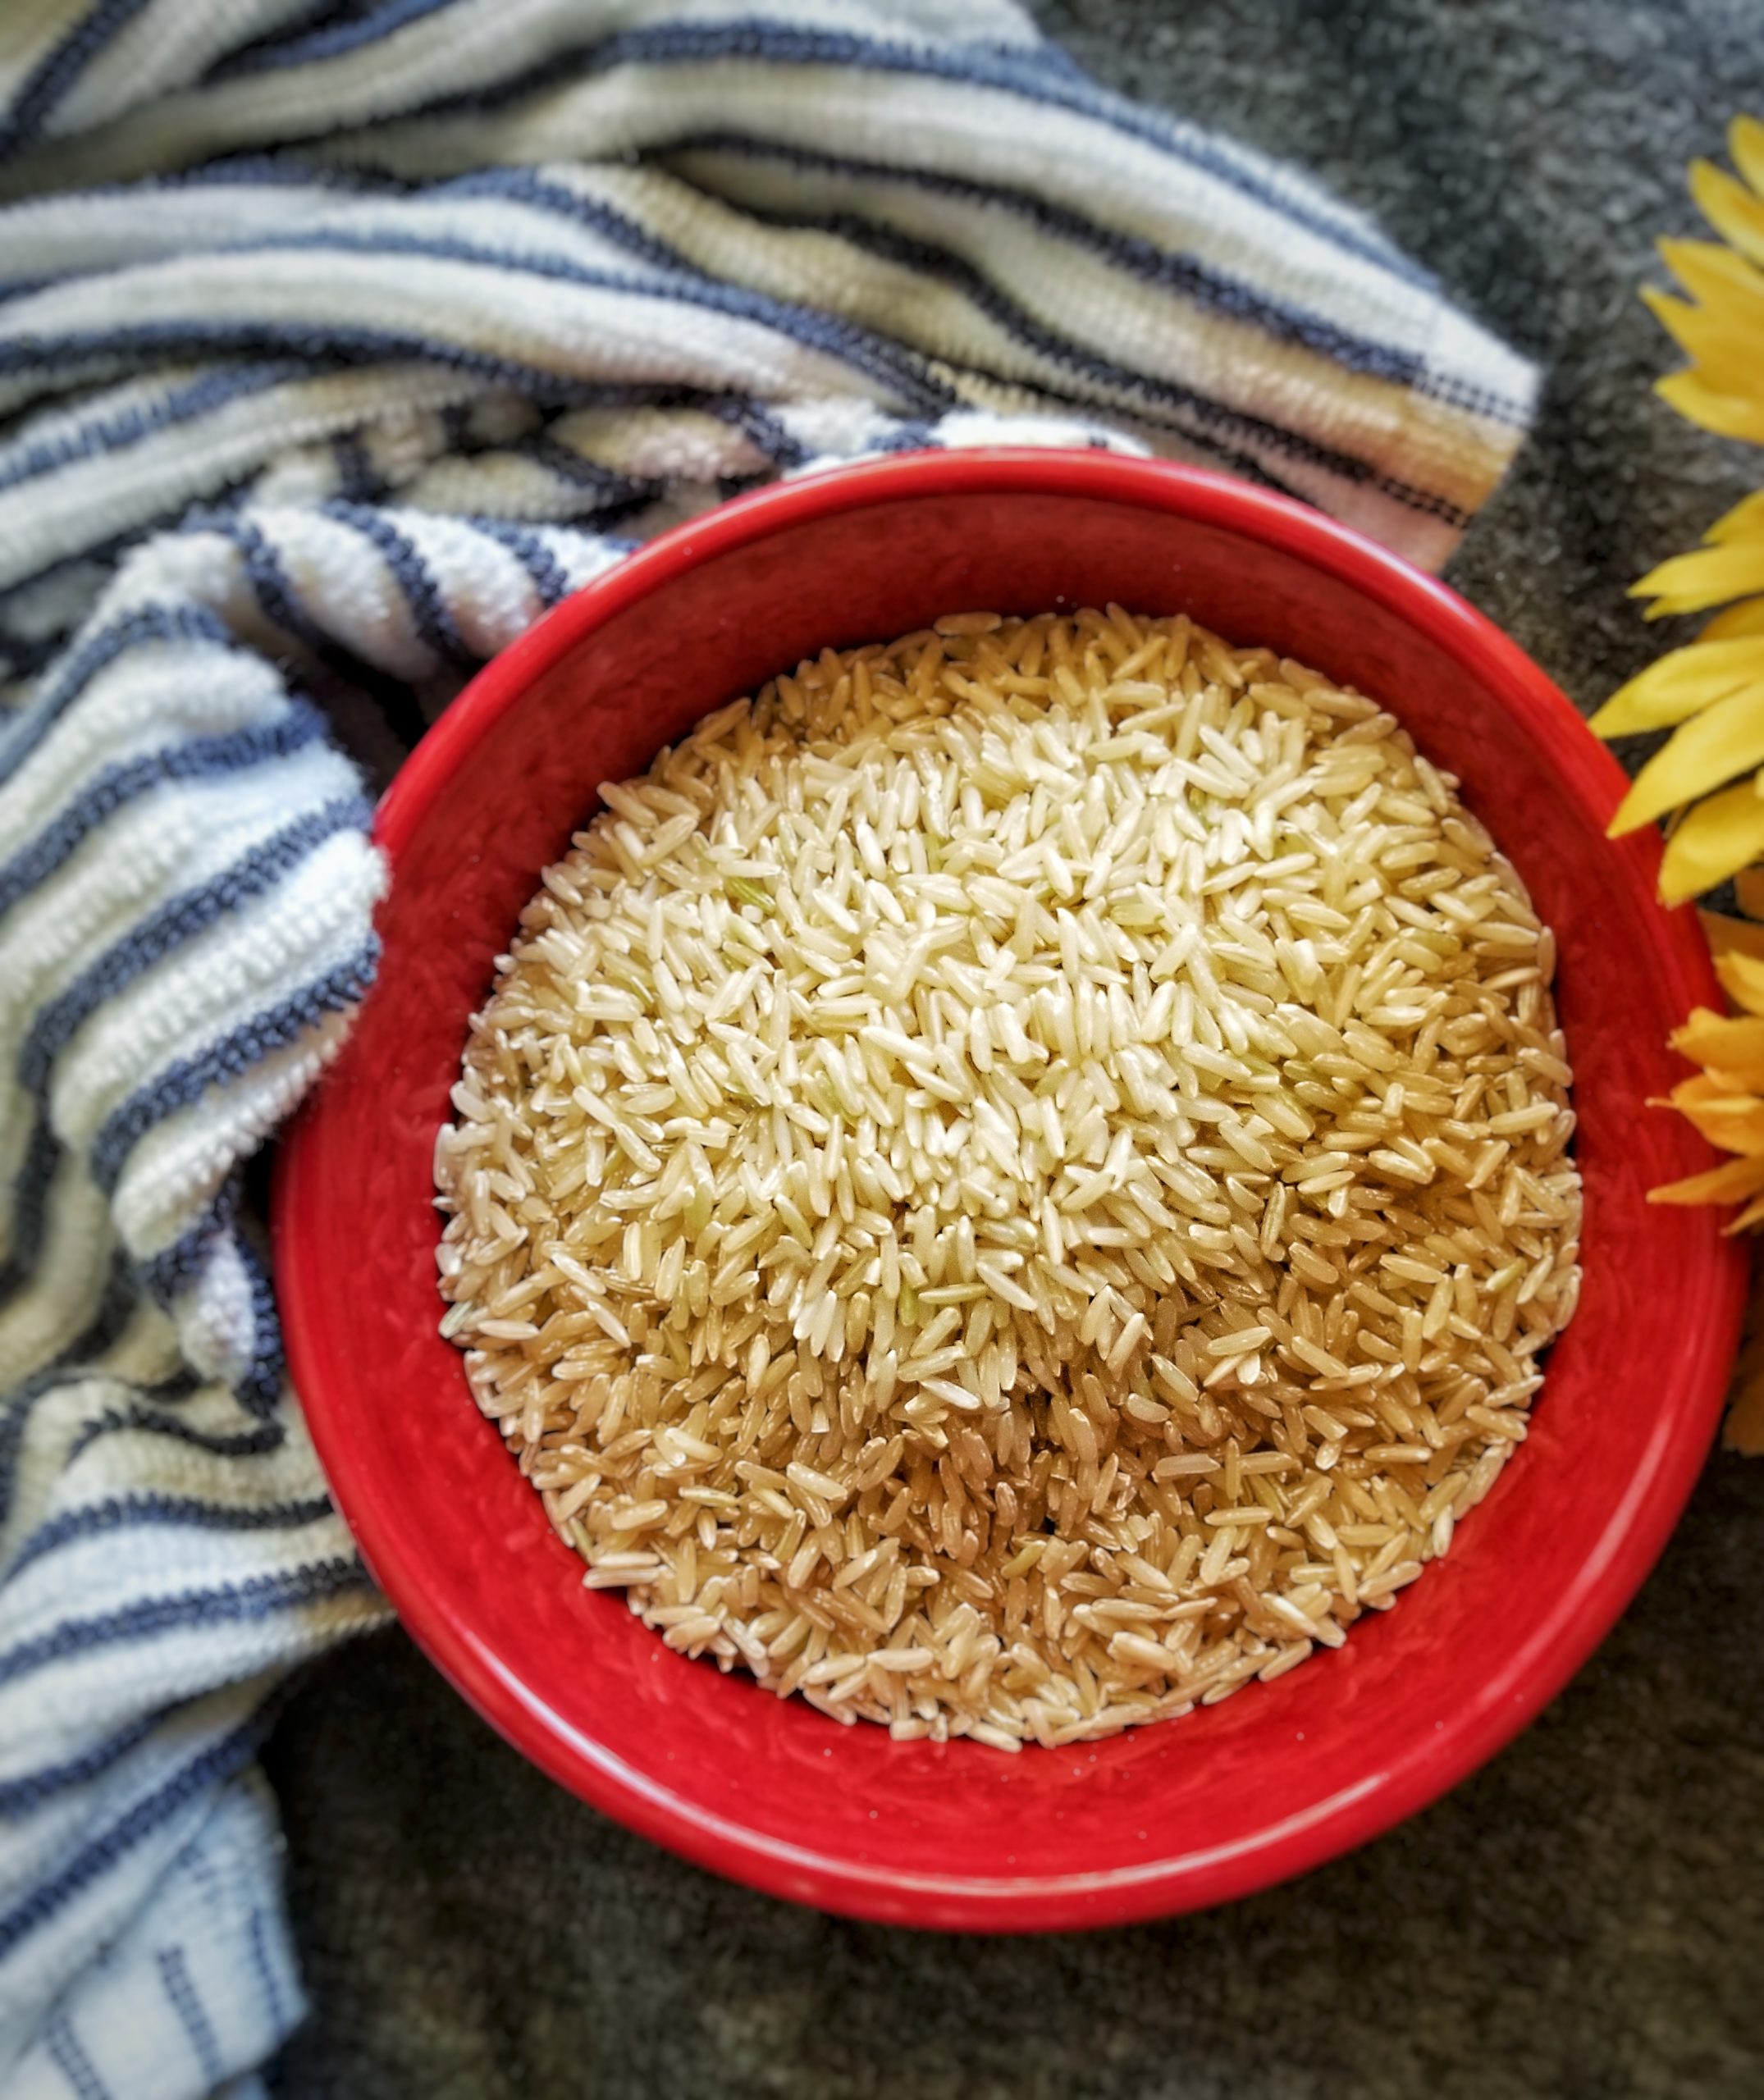 Brown rice in a red bowl